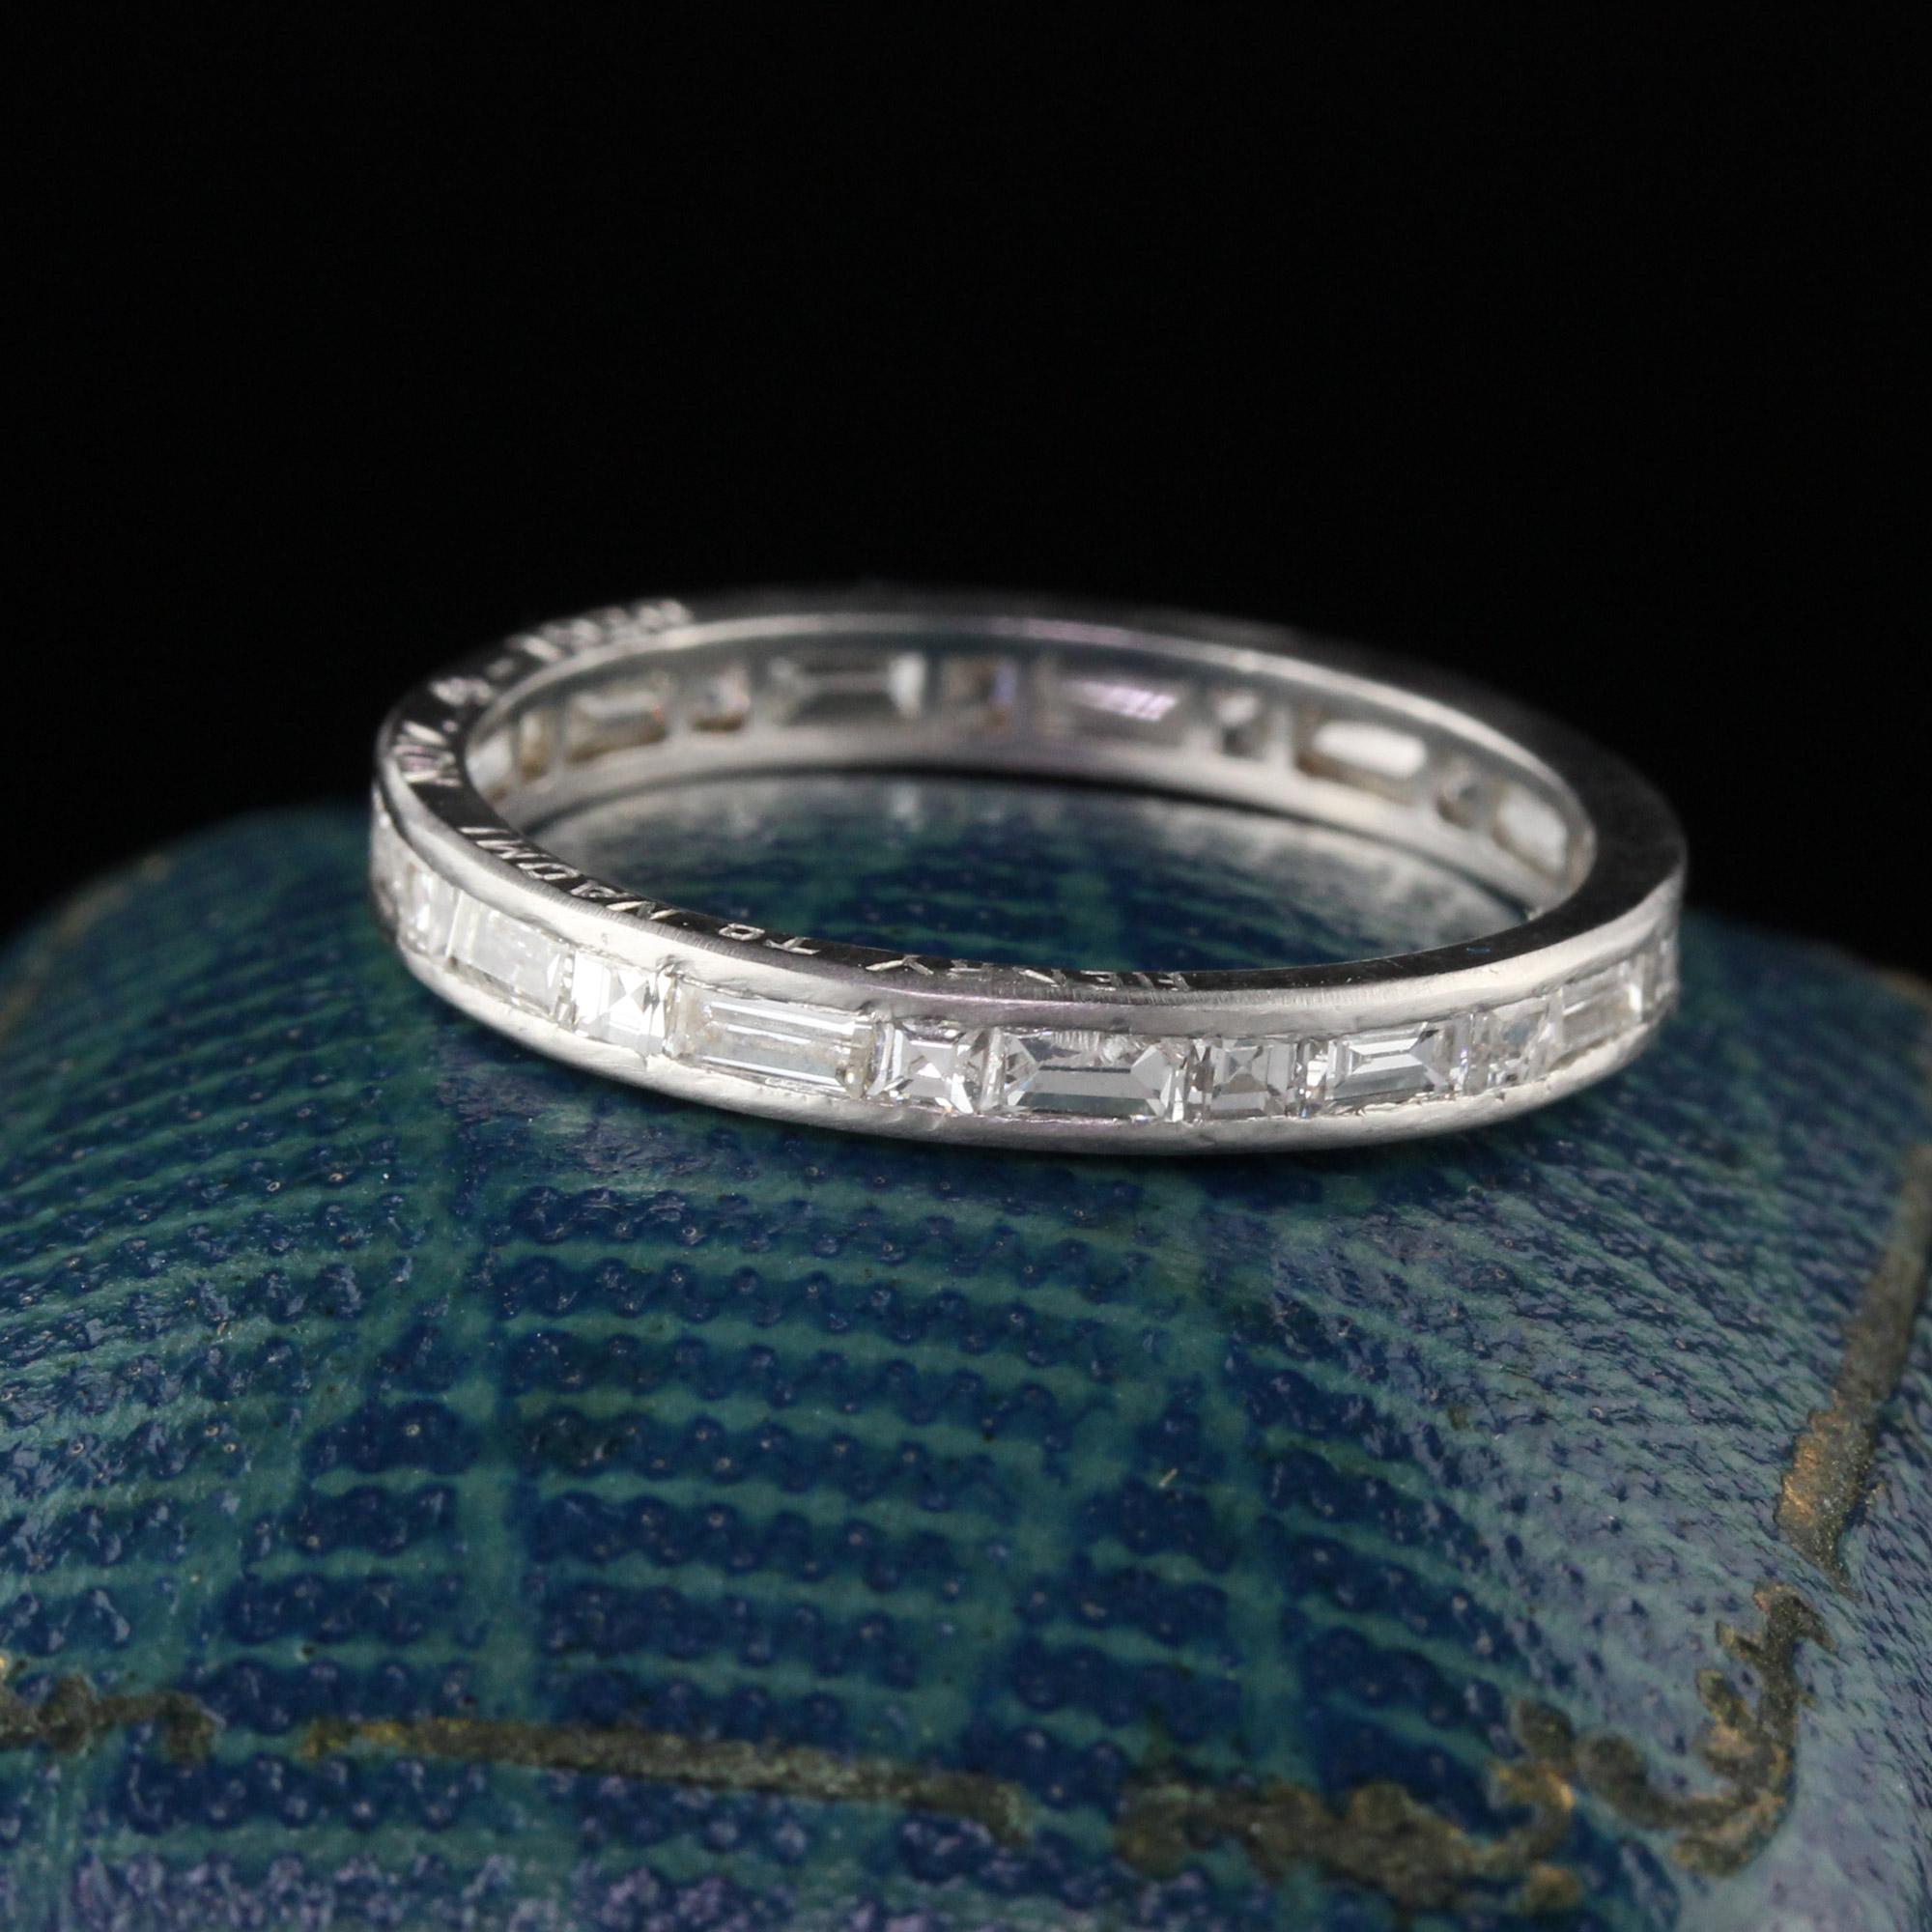 Circa 1930's beautiful art deco eternity band in platinum with alternating baguette cut & carre cut diamonds! In very good condition! The perfect wedding band or stacking band! Engraved 'HENRY TO NAOMI NOV. 4 - 1930'

#R0340

Metal: